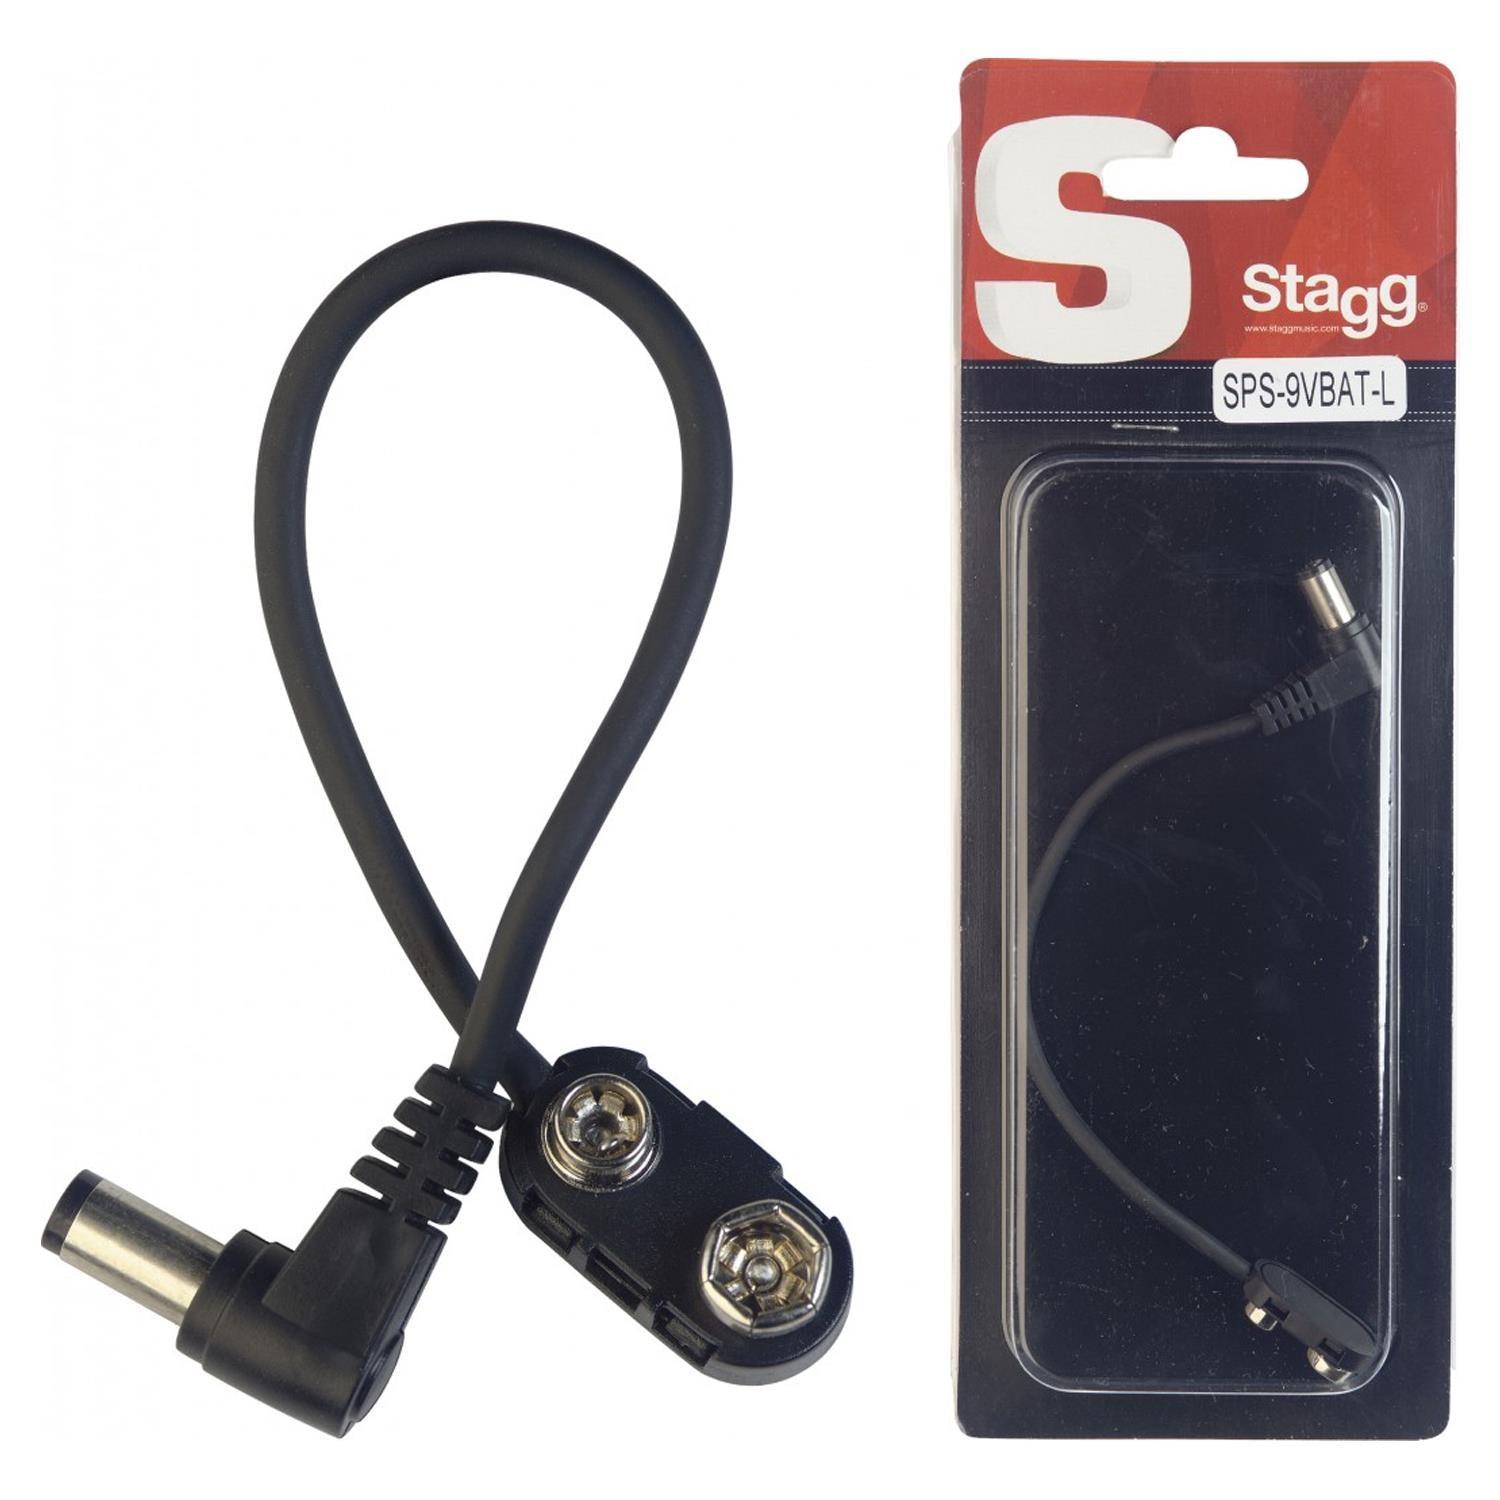 Stagg SPS-9VBAT-L Guitar Effects Pedal 9V Battery Connector - DY Pro Audio